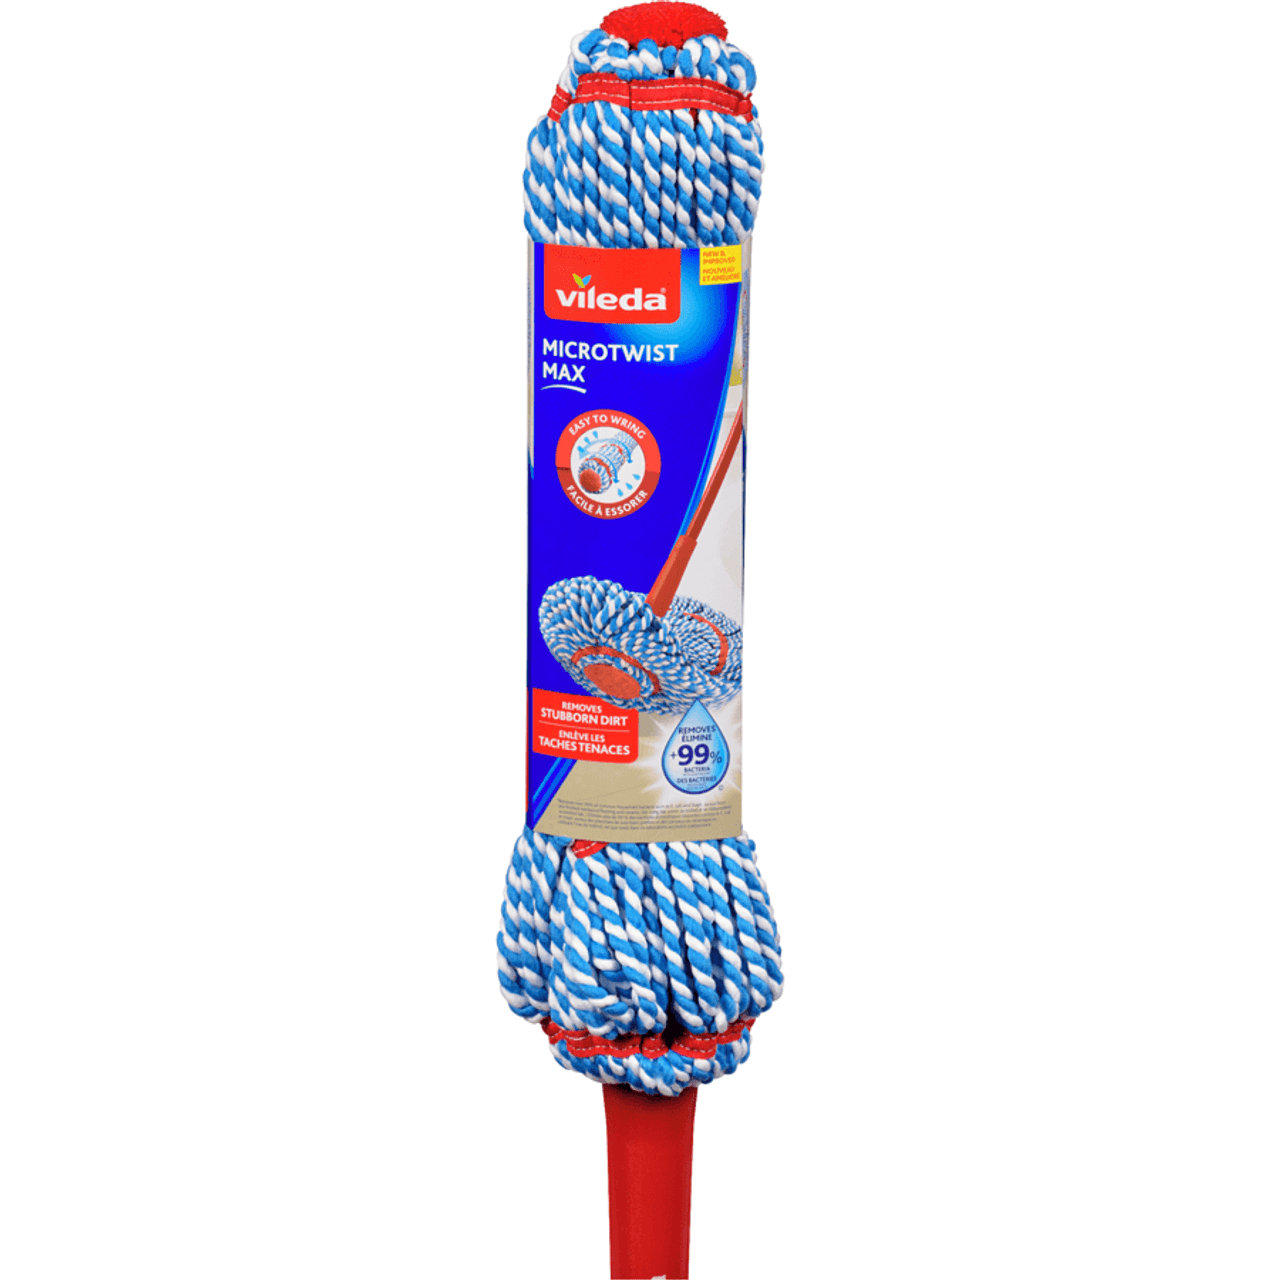 VILEDA MicroTwist Mop Efficient Cleaning with Built-in Twist System(4/Case)-Chicken Pieces